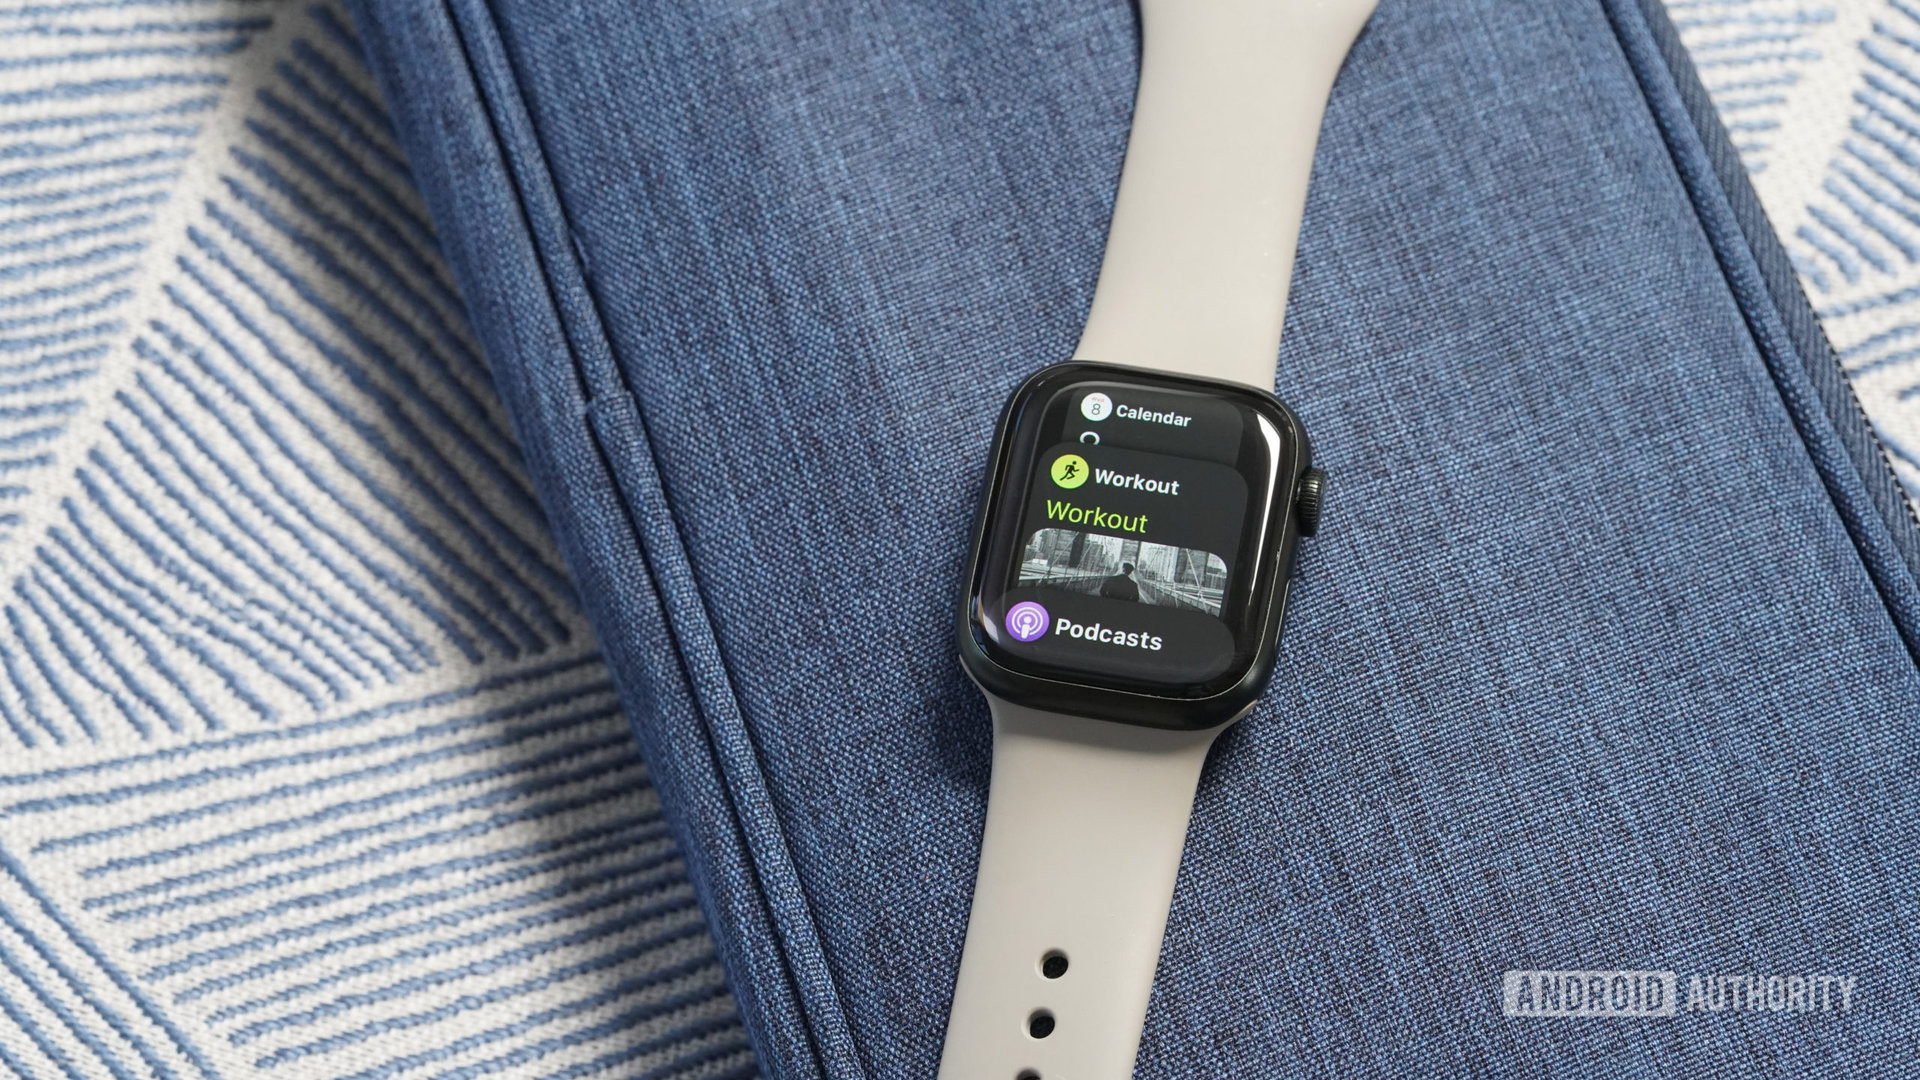 watchOS 9 includes an updated Dock and upgrades to other native apps including calendar, podcast, and workout apps.